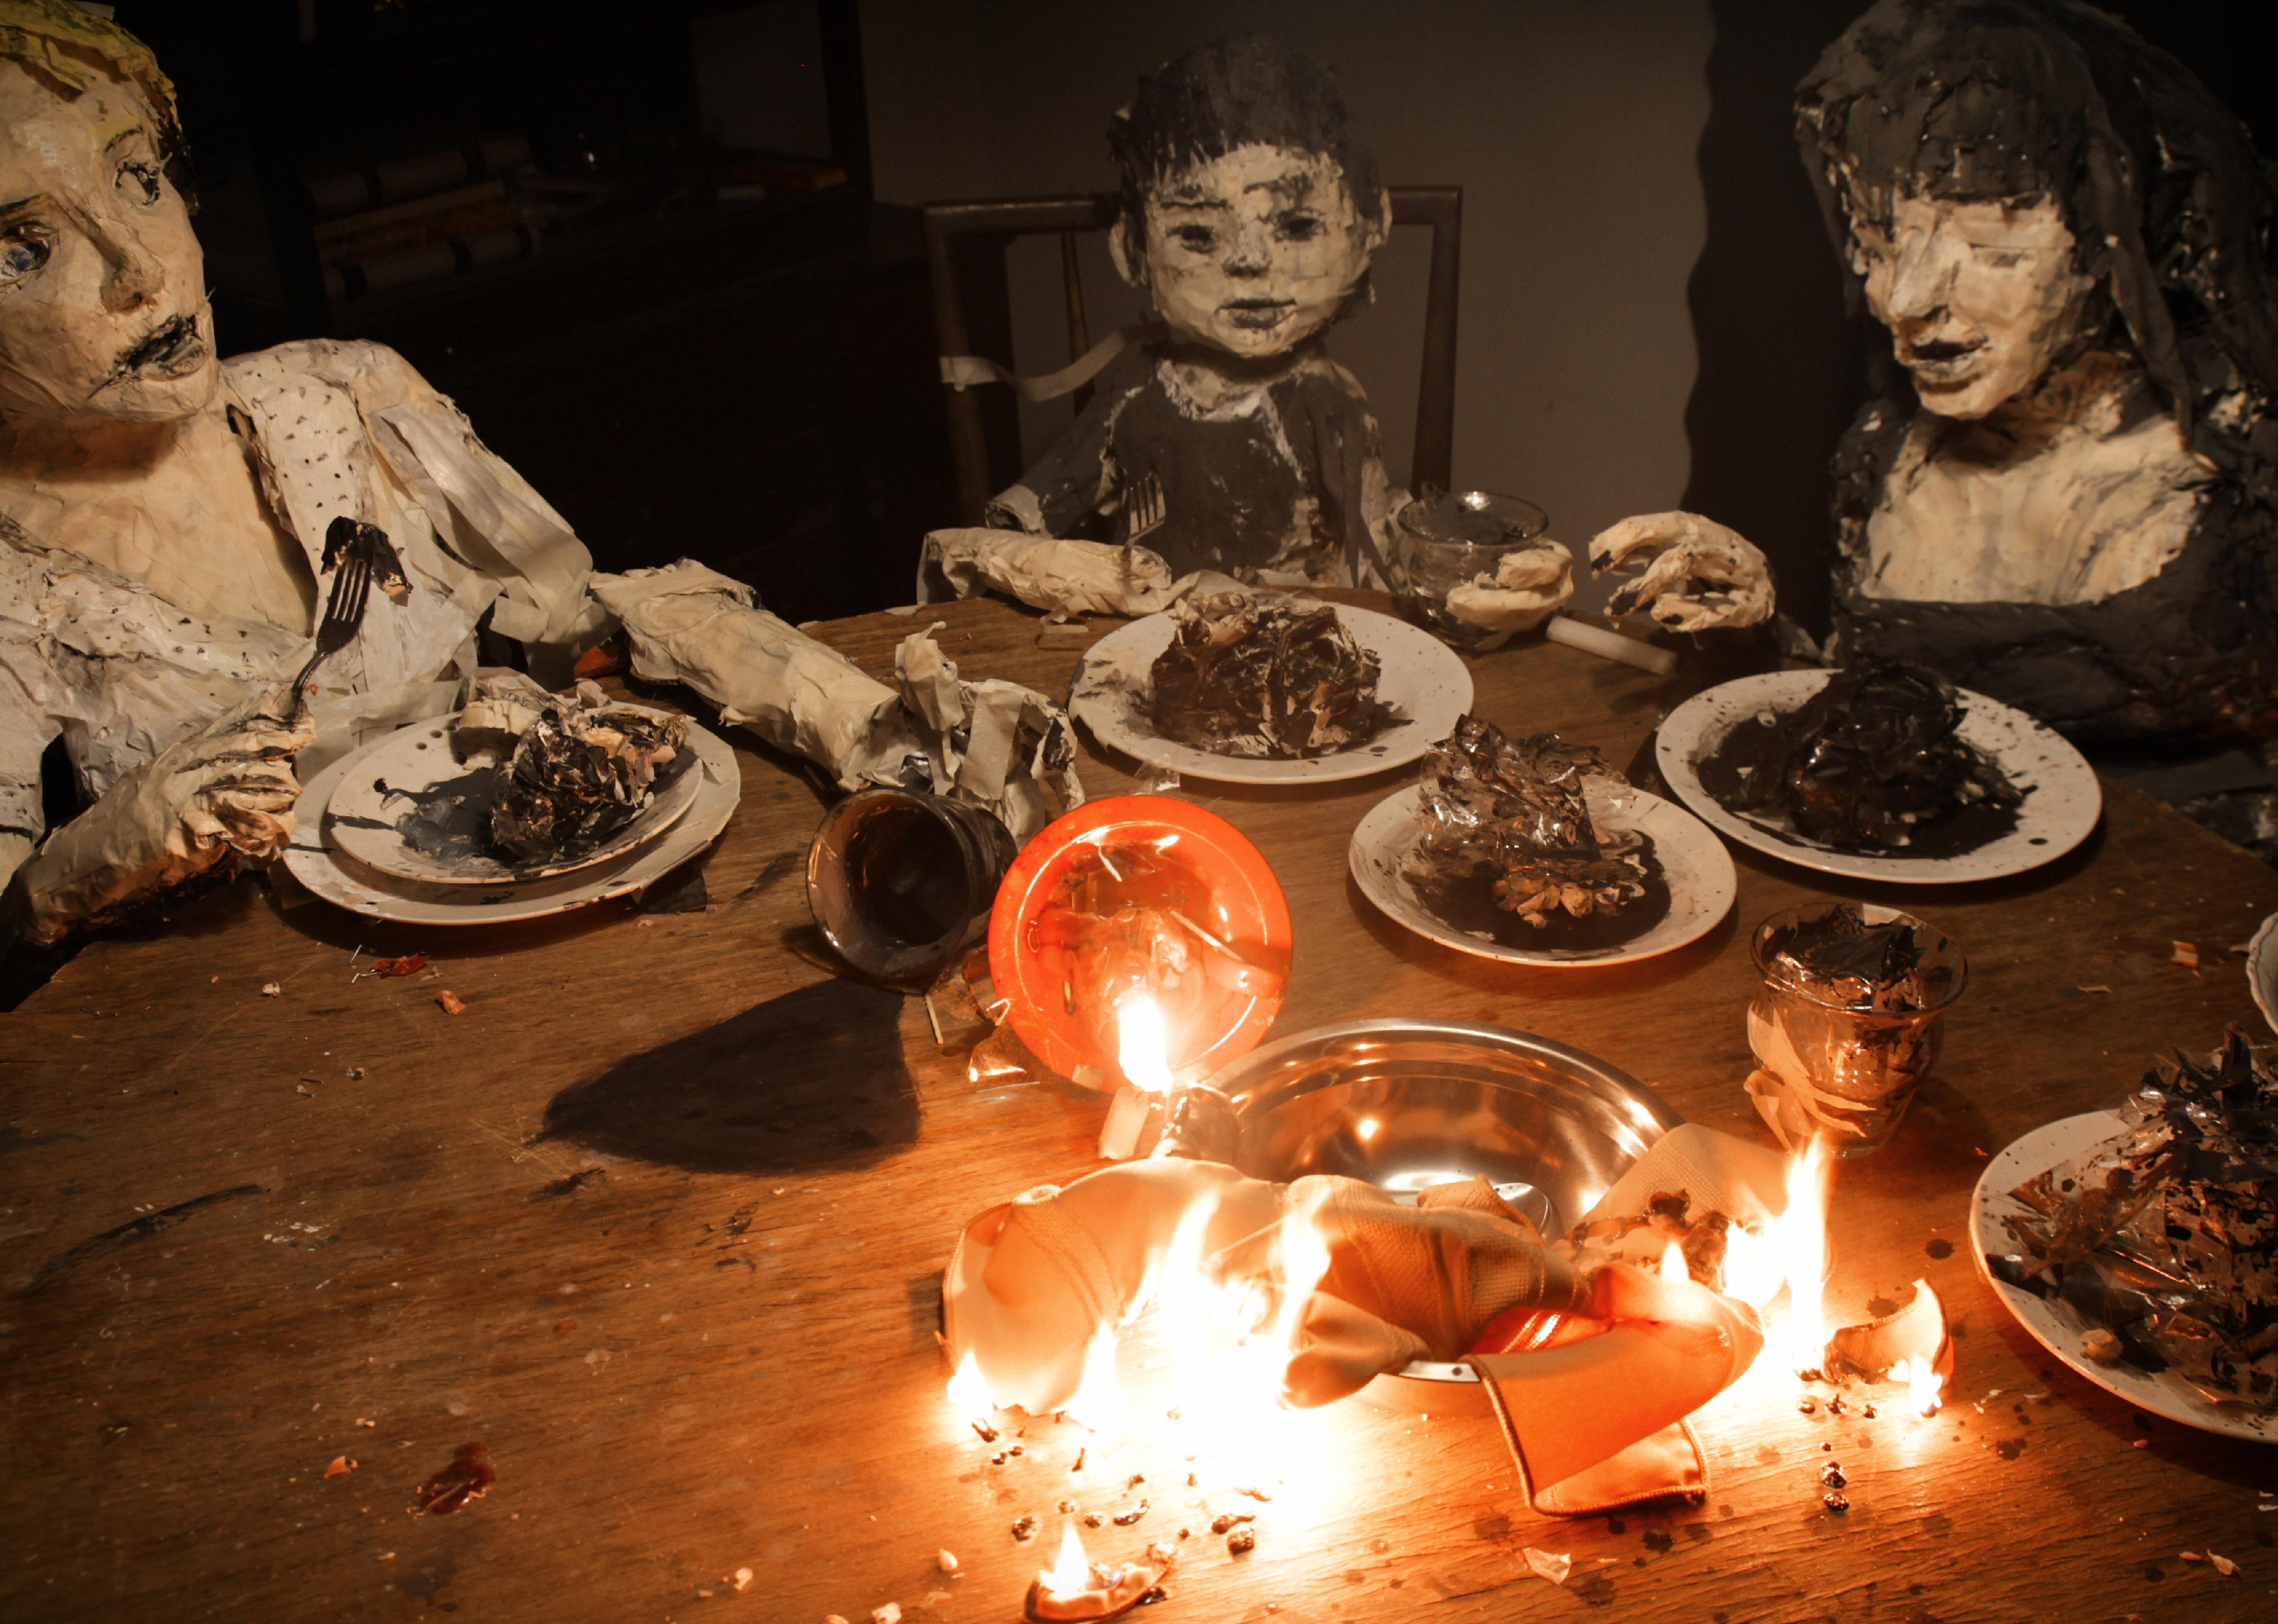 A family of paper dolls eats dinner at a table with burning bowls in the center.